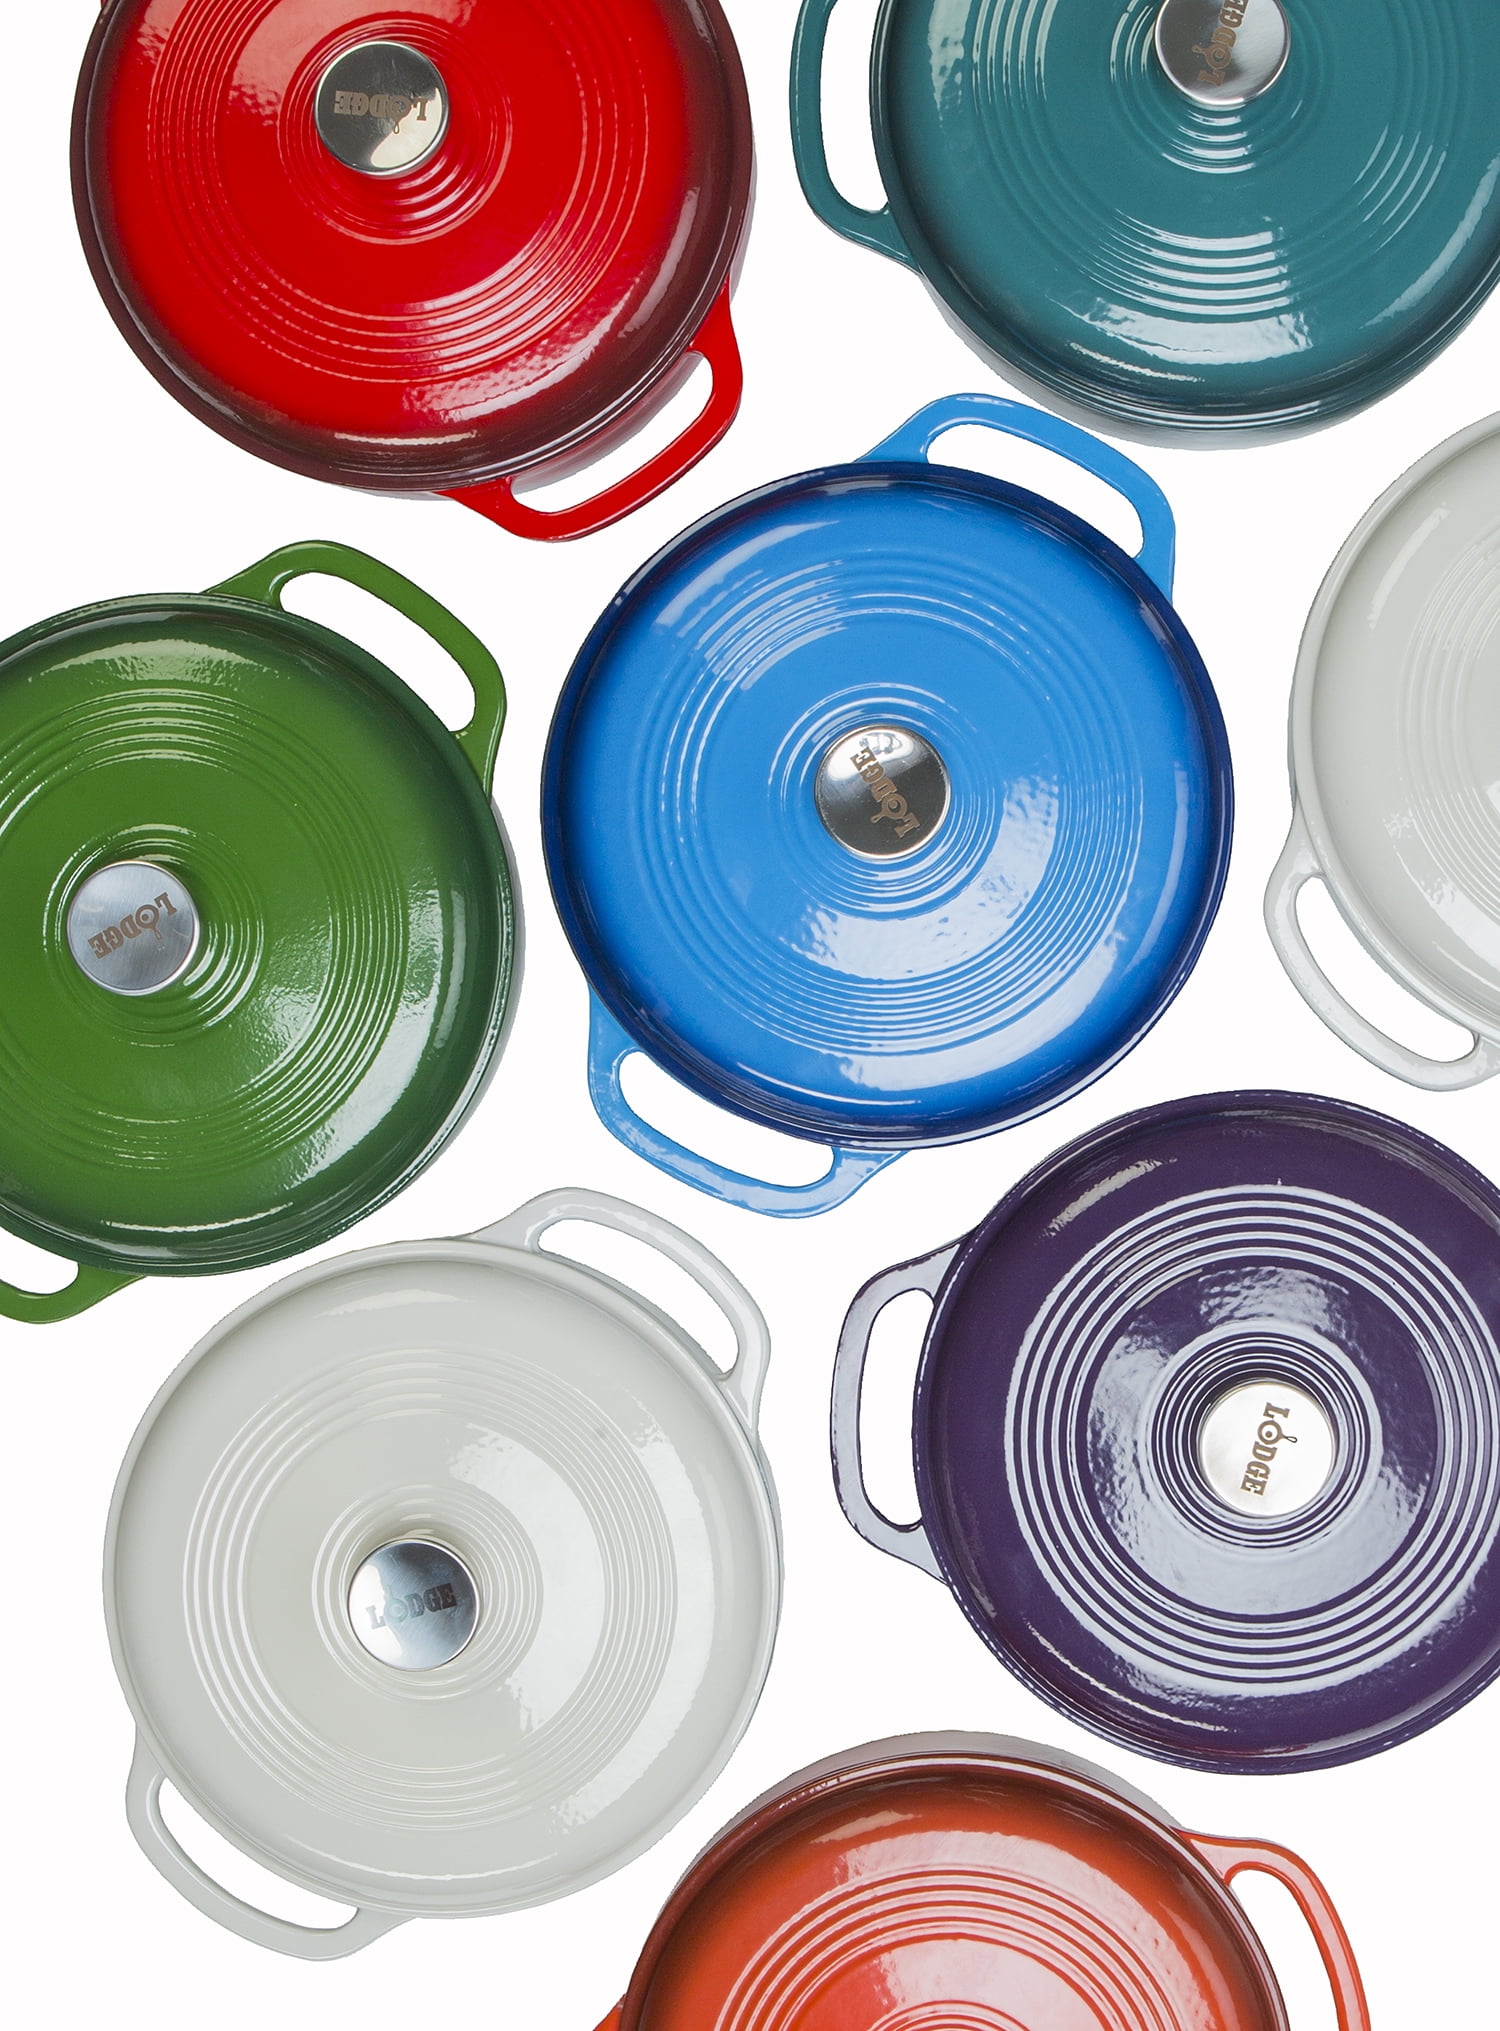 Waste different Hilarious Lodge 6 Quart Enameled Cast Iron Dutch Ovens in Assorted Colors -  Walmart.com